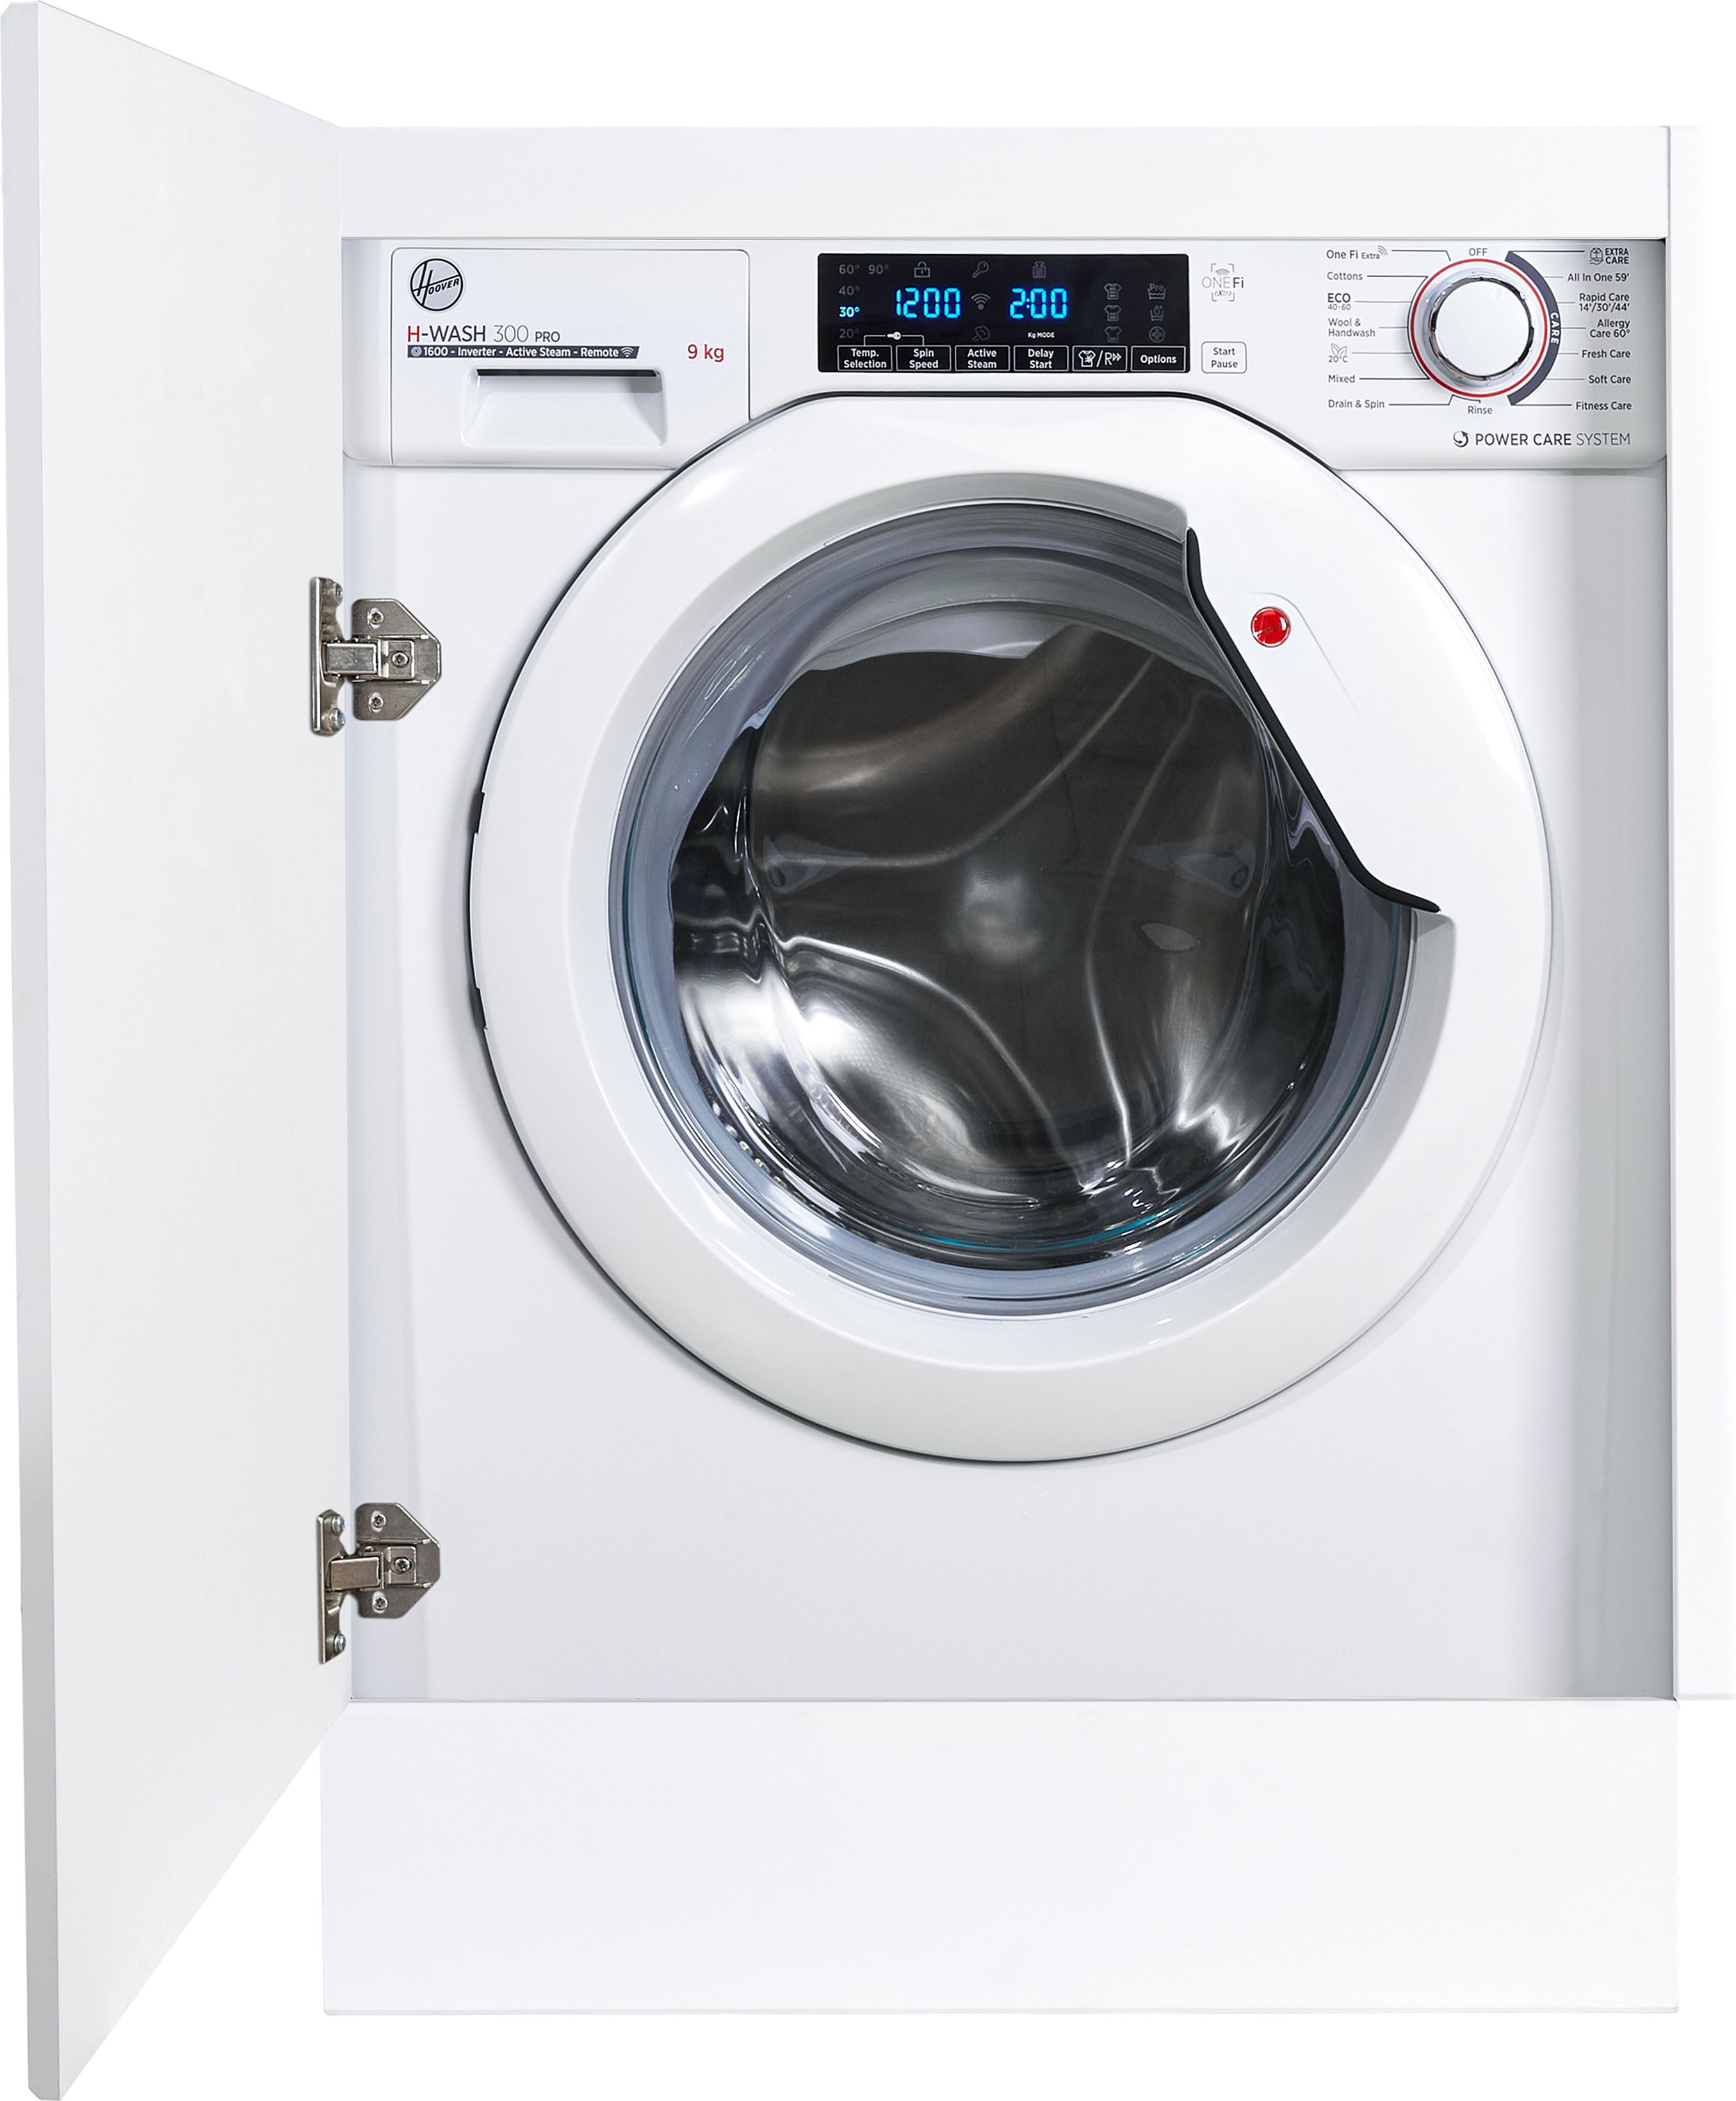 Hoover H-WASH 300 PRO HBWOS69TAME Integrated 9kg Washing Machine with 1600 rpm - White - A Rated, White